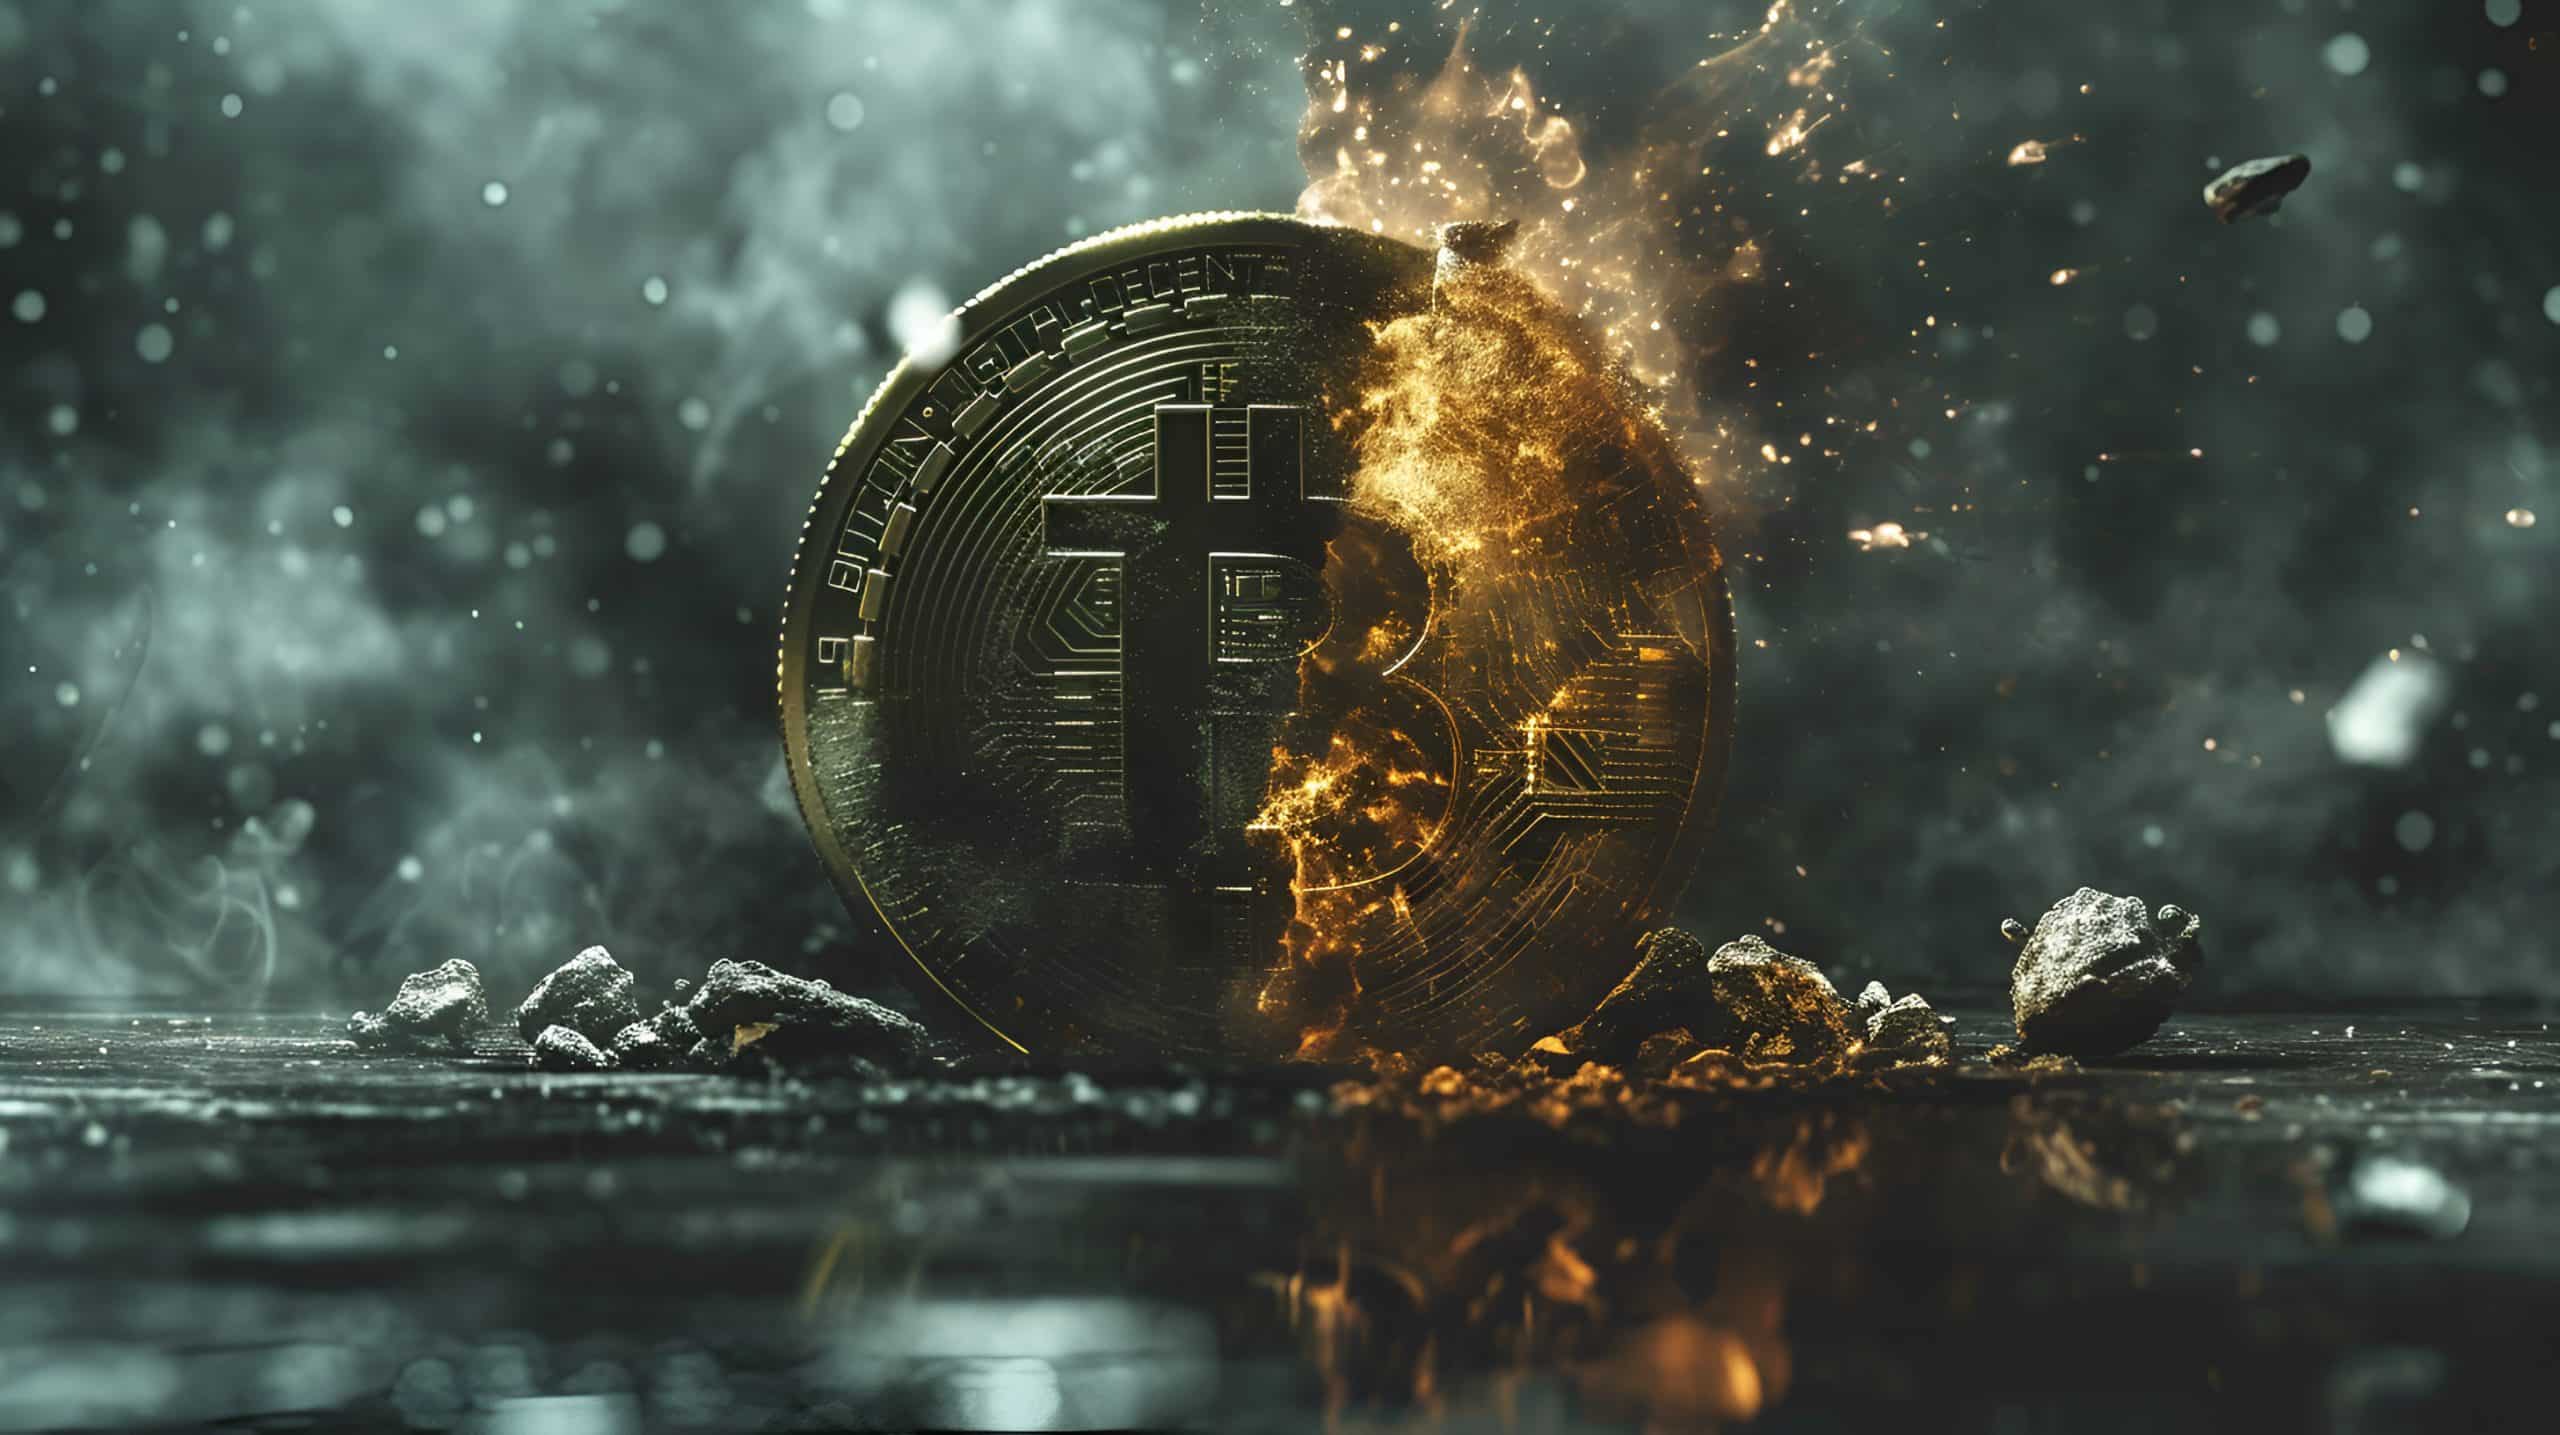 A physical bitcoin coin engulfed in flames, symbolizing the volatility and uncertainty surrounding the upcoming bitcoin halving event.